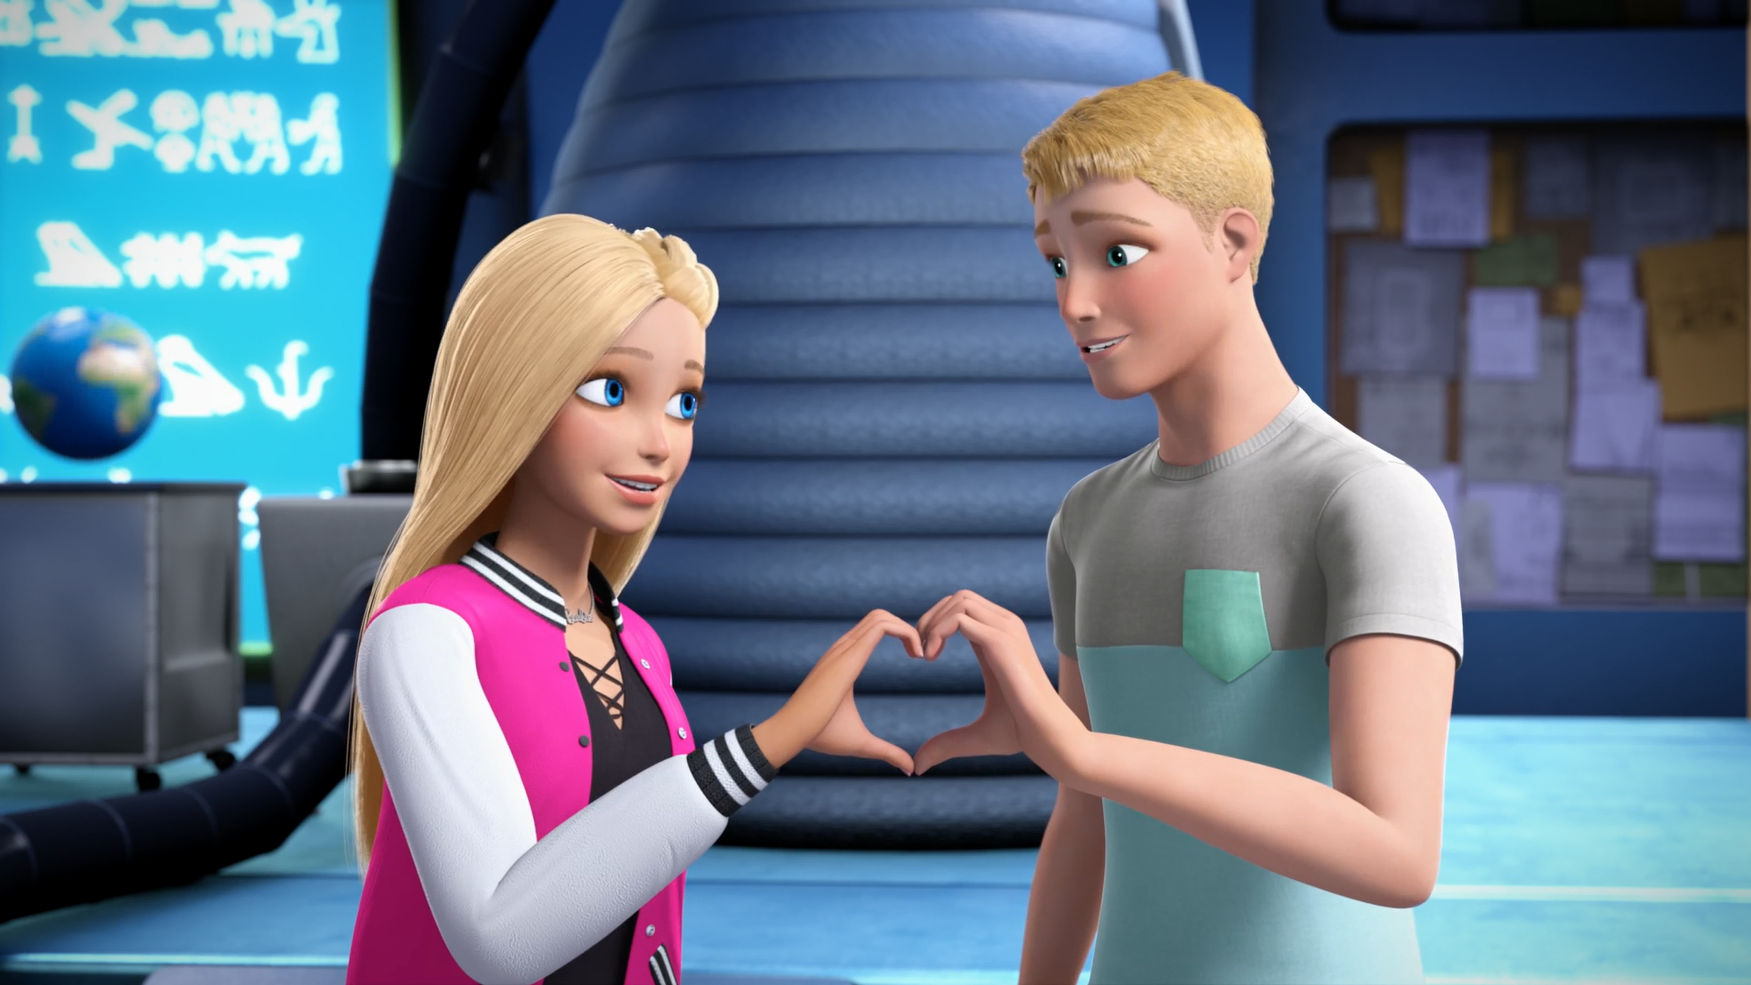 Heart of Barbie and Ken in Barbie Dreamhouse Adventures. Barbie e